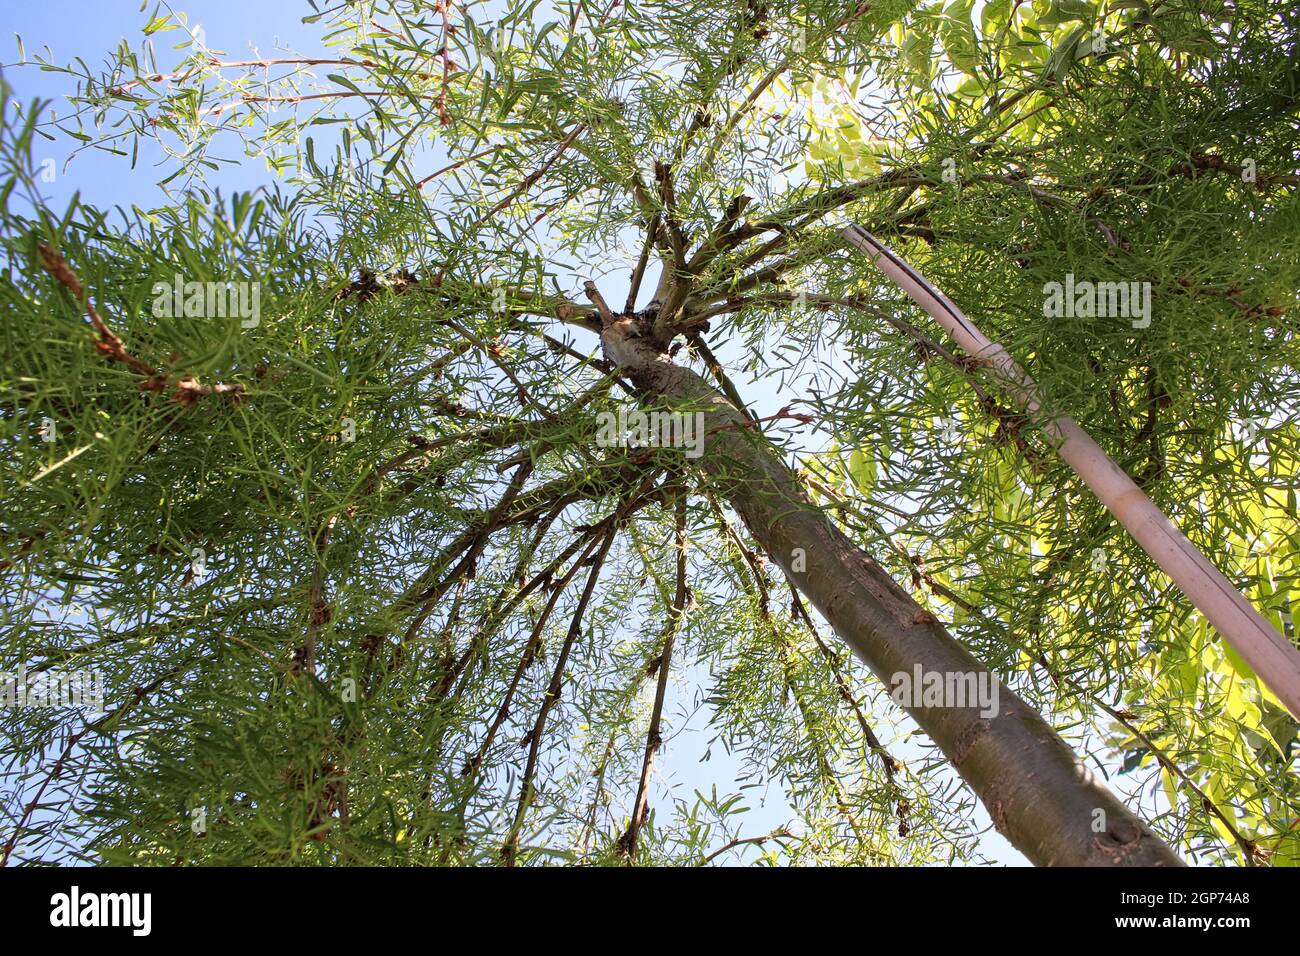 Looking up through the branches of a peashrub caragana. Stock Photo